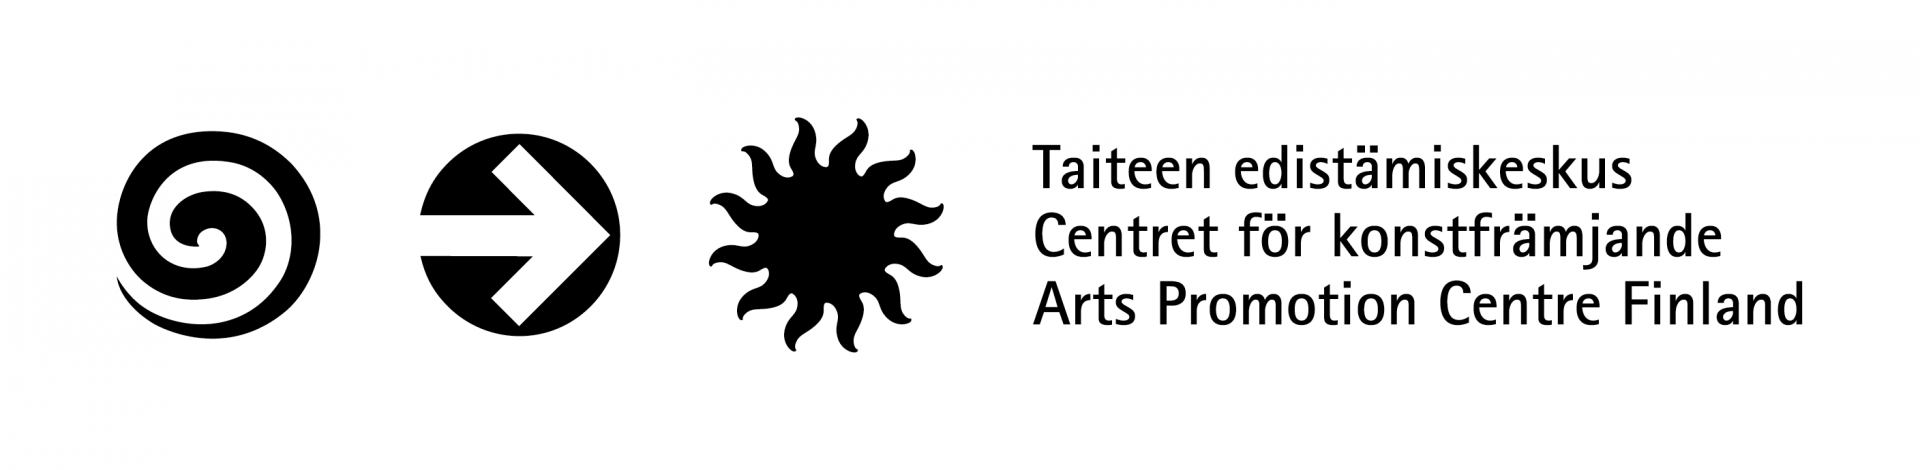 The logo of Arts Promotion Centre Finland. On the left side of the logo, there are three circular symbols: a spiral, an arrow pointing to the right, and a black sun. Following the symbols, the name of the center is written in three languages stacked on top of each other: Taiteen edistämiskeskus, Centret för konstfrämjande, and Arts Promotion Centre Finland.